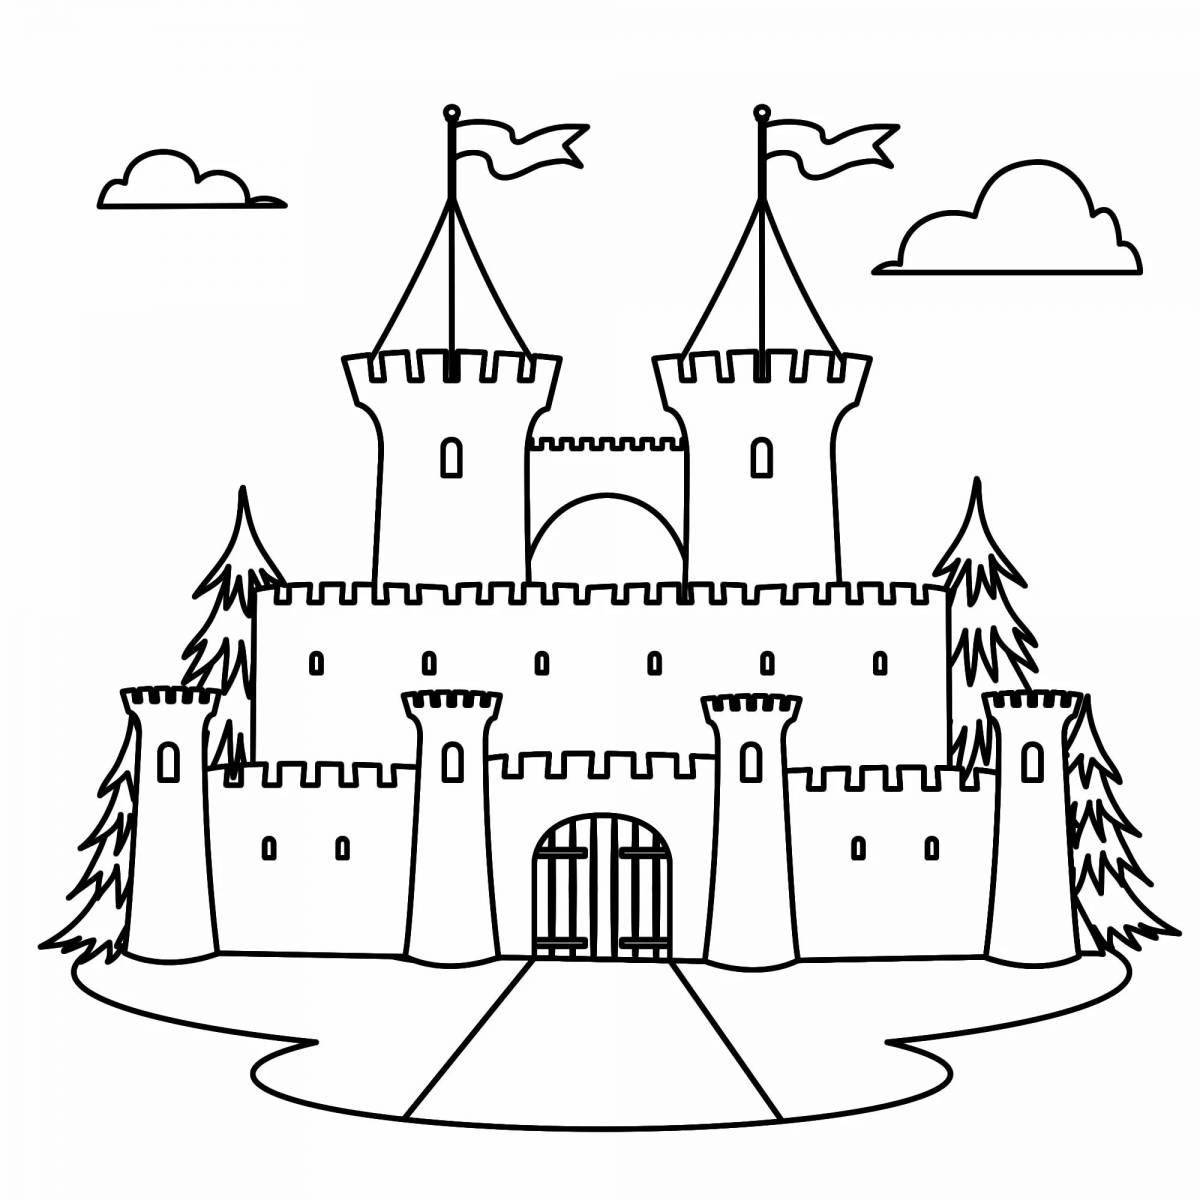 A grandiose coloring book for girls with houses and castles